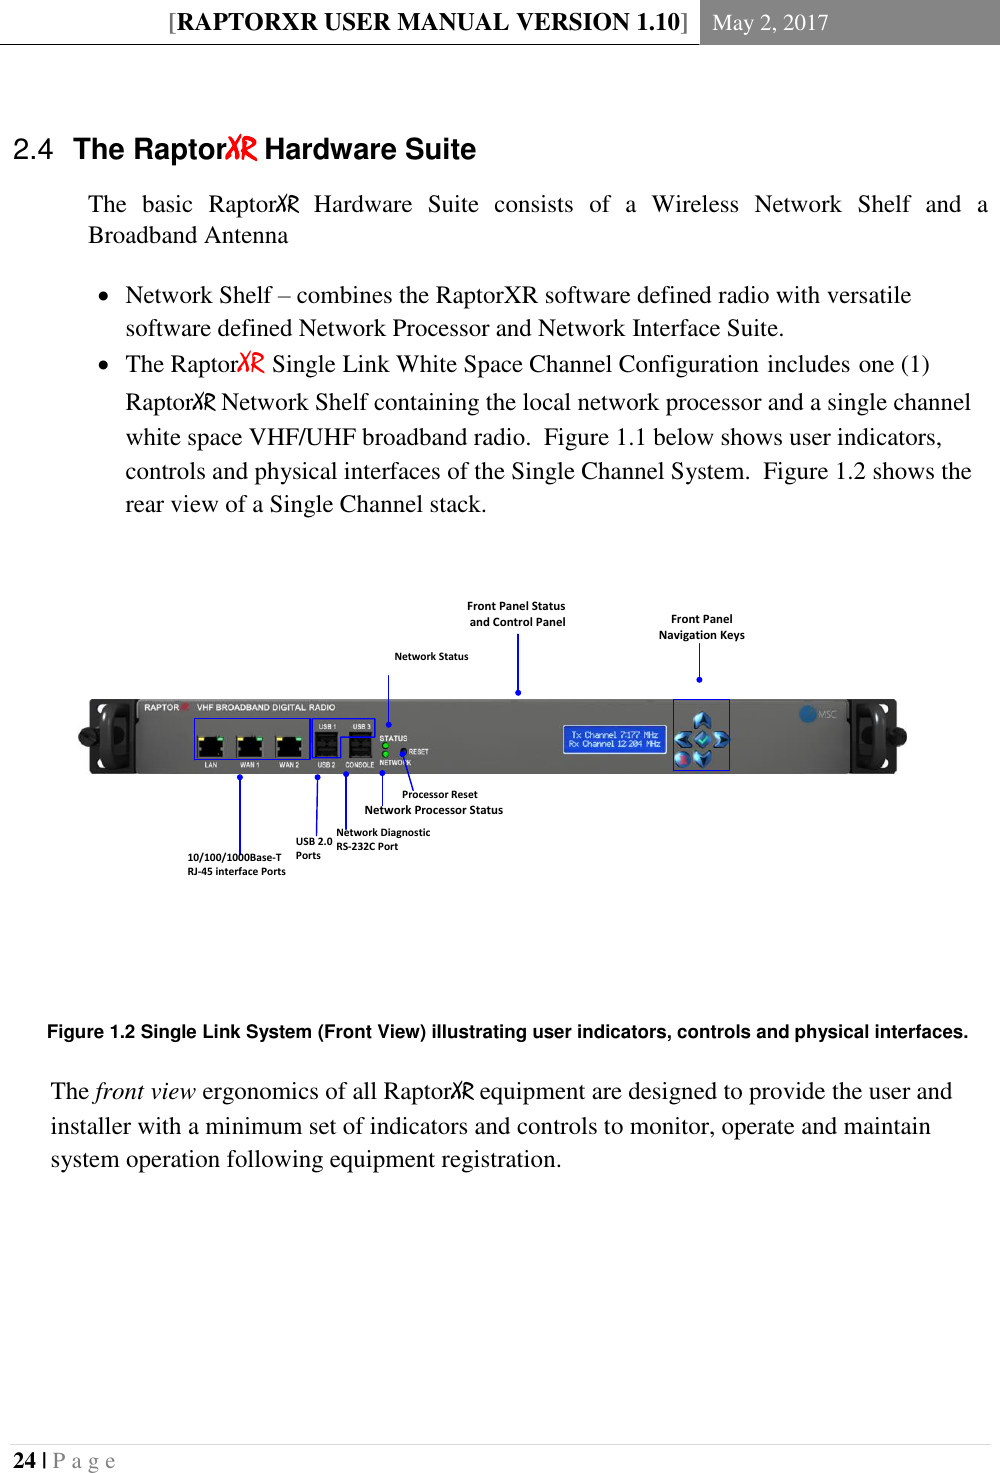 [RAPTORXR USER MANUAL VERSION 1.10] May 2, 2017  24 | P a g e     The RaptorXR Hardware Suite 2.4The  basic  RaptorXR  Hardware  Suite  consists  of  a  Wireless  Network  Shelf  and  a Broadband Antenna   Network Shelf – combines the RaptorXR software defined radio with versatile software defined Network Processor and Network Interface Suite.  The RaptorXR Single Link White Space Channel Configuration includes one (1) RaptorXR Network Shelf containing the local network processor and a single channel white space VHF/UHF broadband radio.  Figure 1.1 below shows user indicators, controls and physical interfaces of the Single Channel System.  Figure 1.2 shows the rear view of a Single Channel stack.   Network Processor StatusProcessor ResetNetwork Status Front Panel Navigation KeysFront Panel Status and Control PanelNetwork DiagnosticRS-232C Port USB 2.0 Ports10/100/1000Base-T RJ-45 interface Ports  The front view ergonomics of all RaptorXR equipment are designed to provide the user and installer with a minimum set of indicators and controls to monitor, operate and maintain system operation following equipment registration.    Figure 1.2 Single Link System (Front View) illustrating user indicators, controls and physical interfaces. 